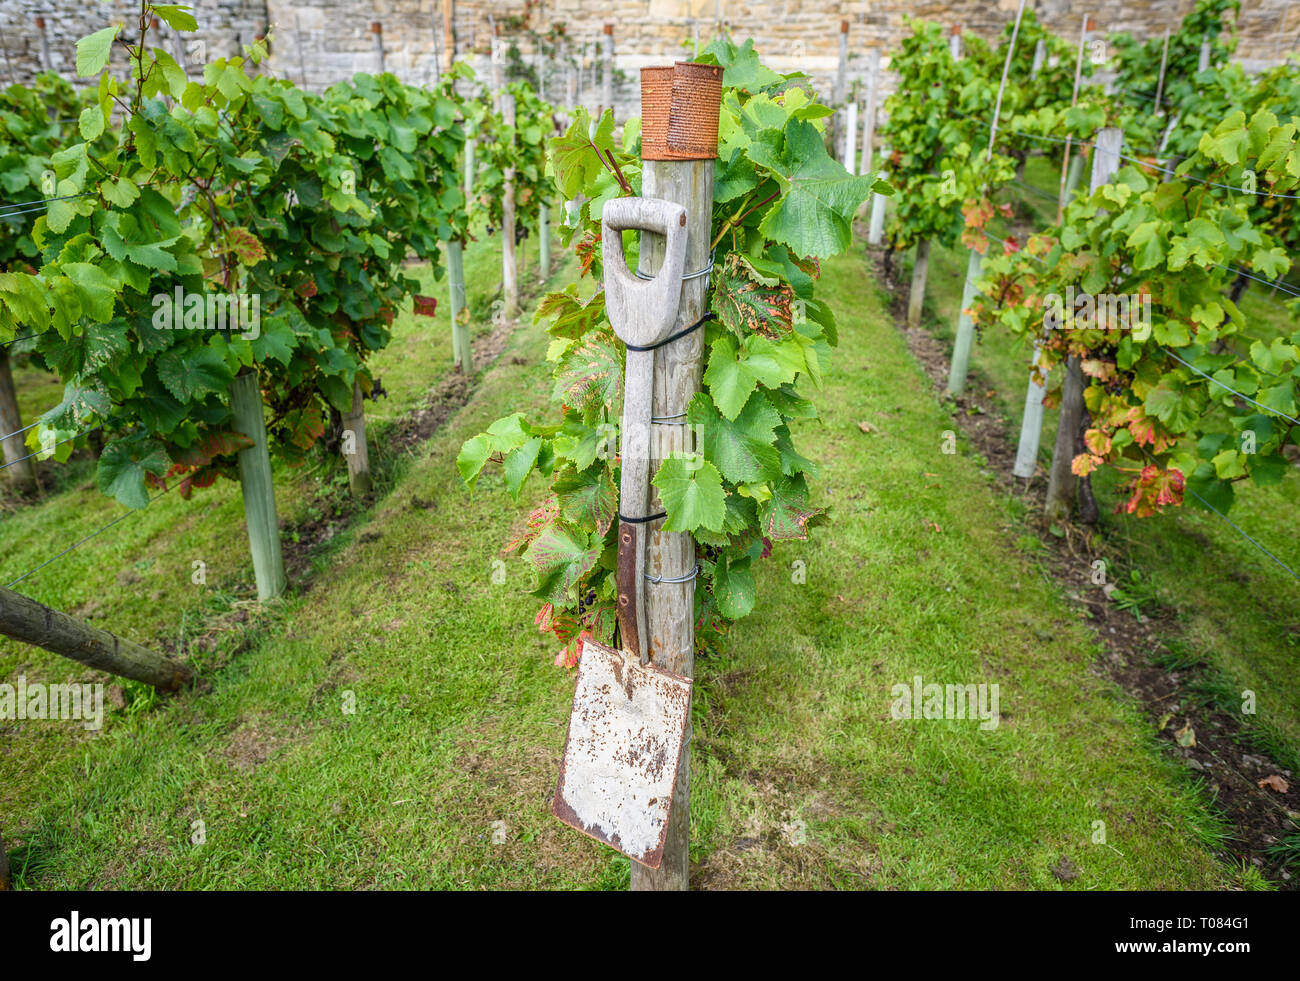 Rows of grapevines growing in a rural garden with a spade Stock Photo